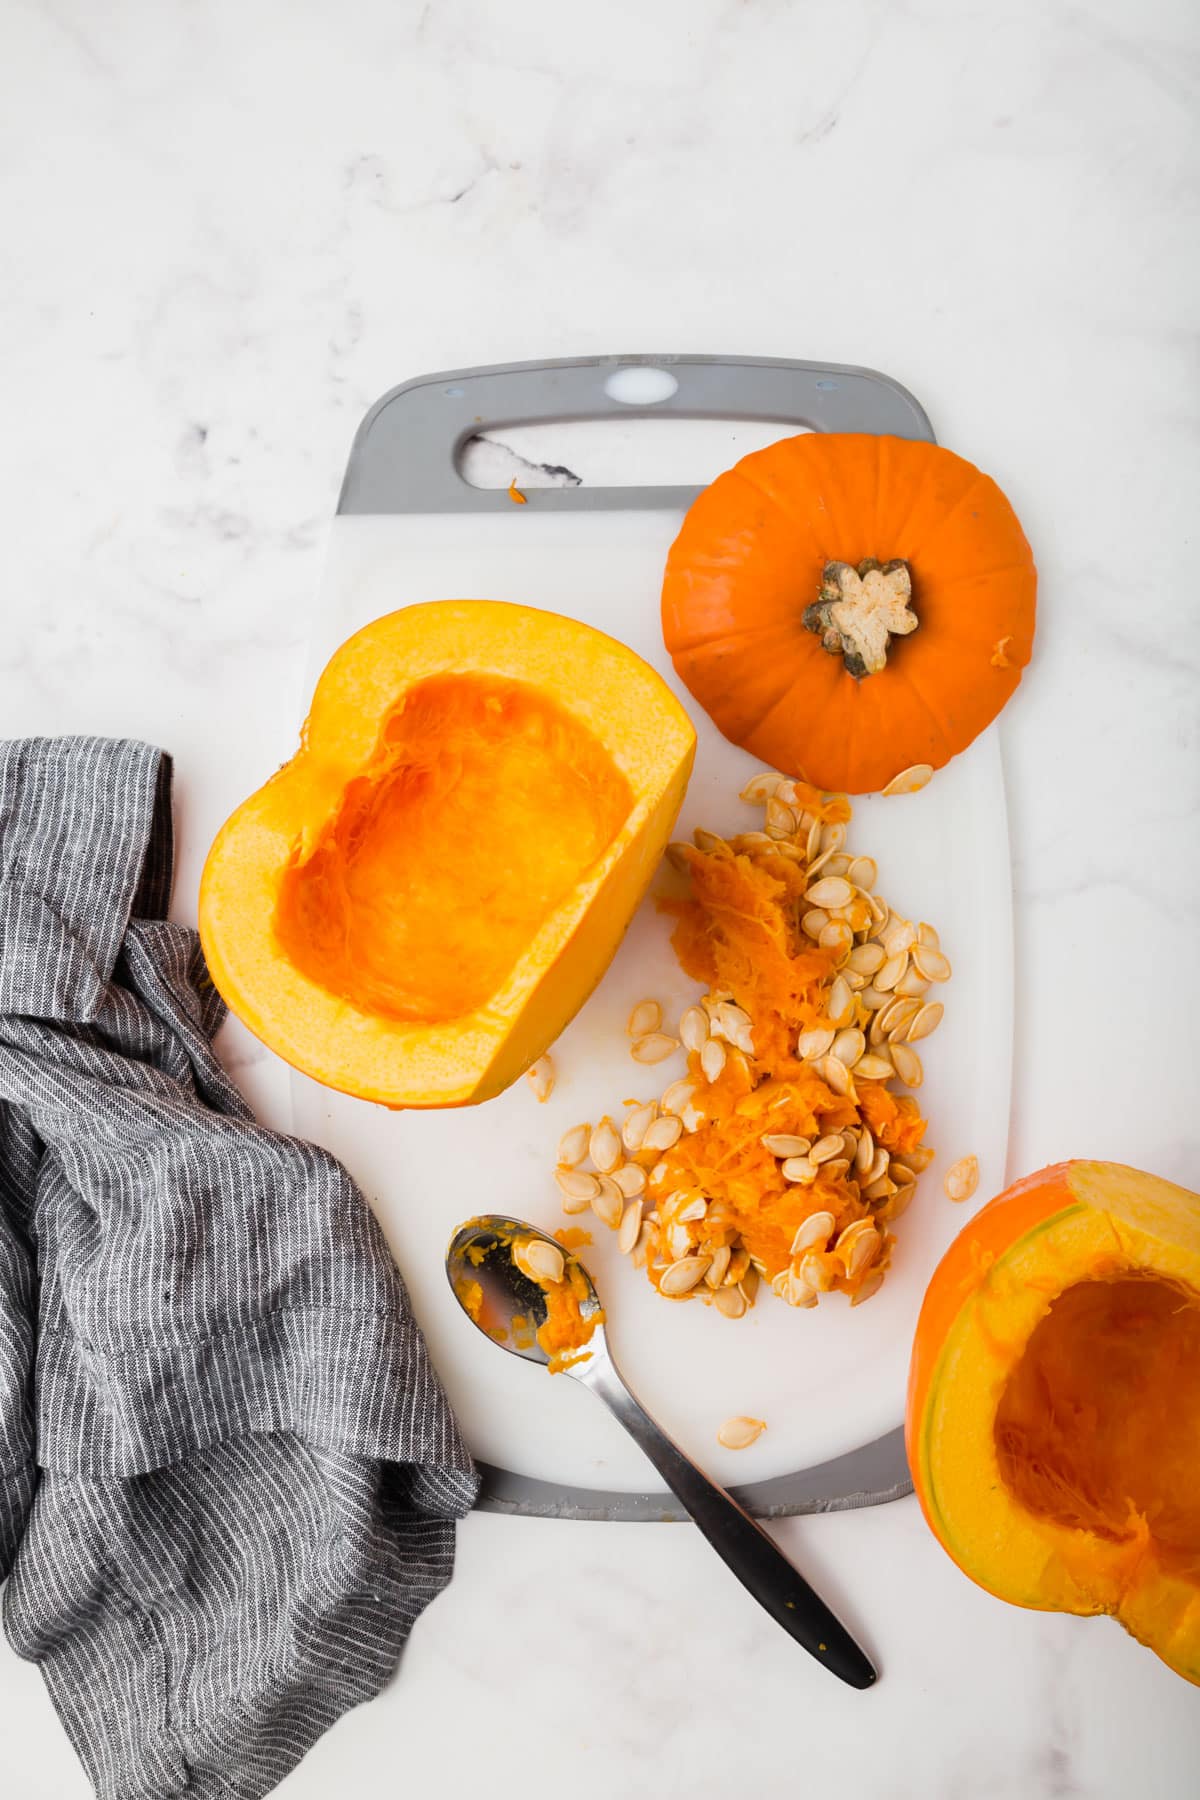 A cutting board with a sugar pumpkin cut in half with the seeds and pulp scooped out of the halves.